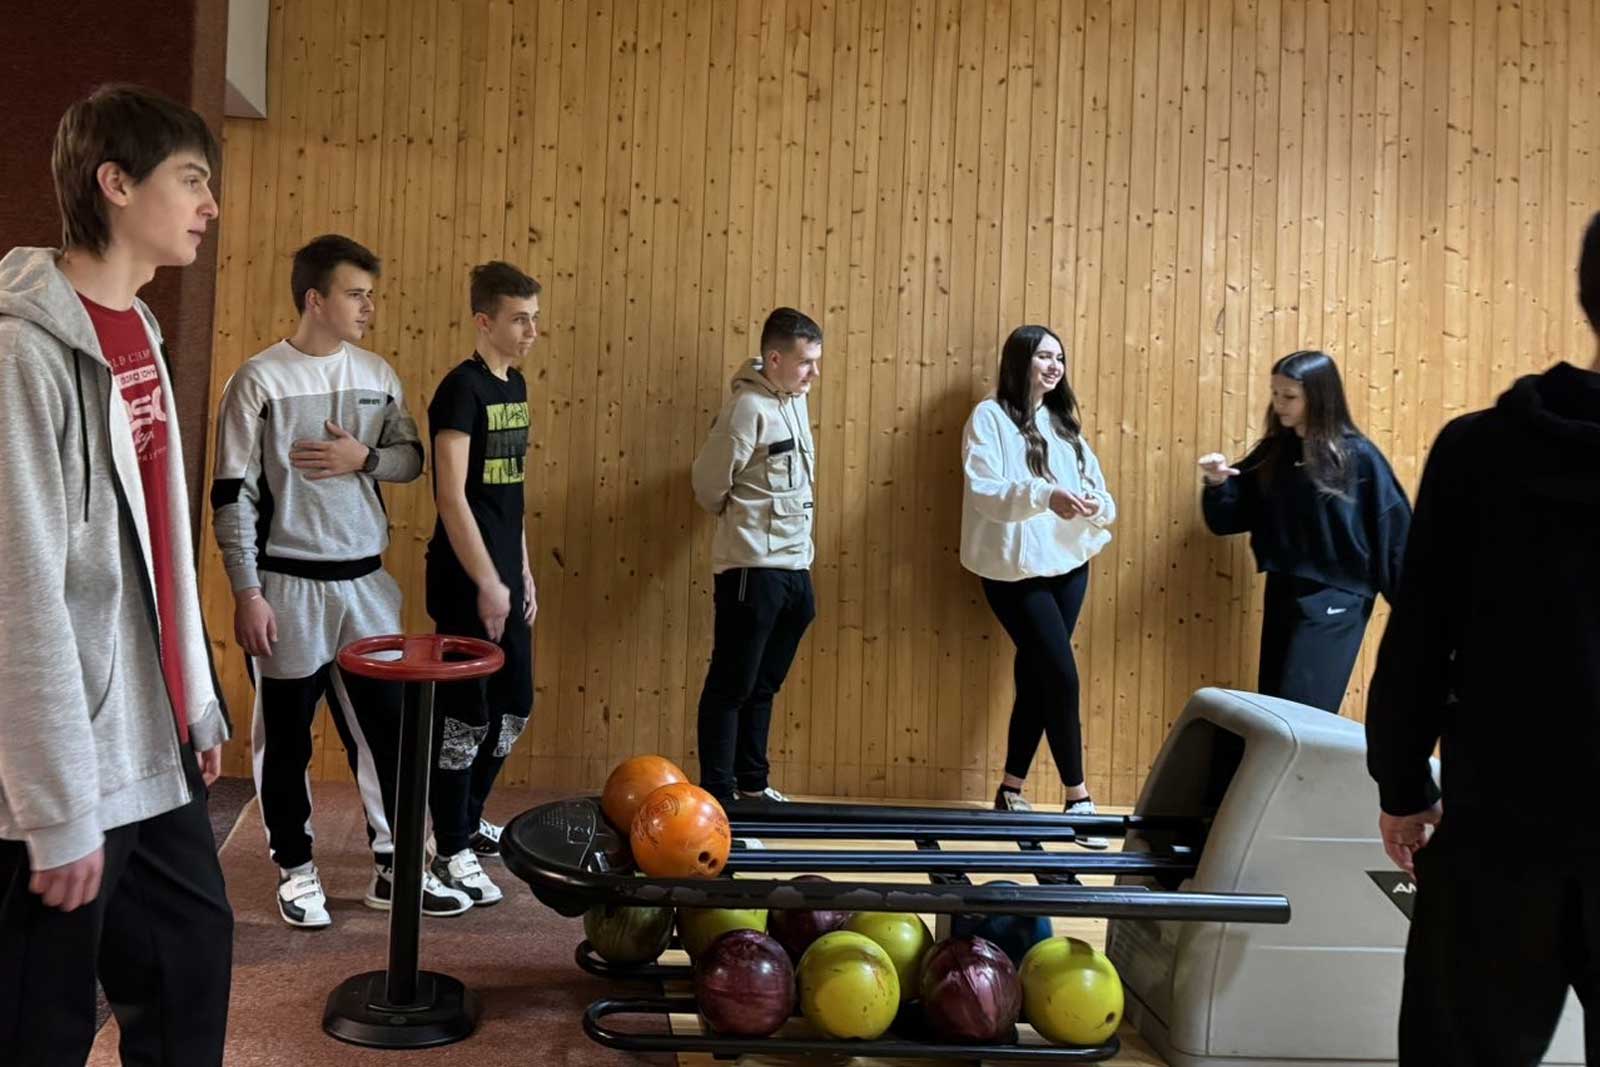 A group of teenagers and young adults at the local bowling alley